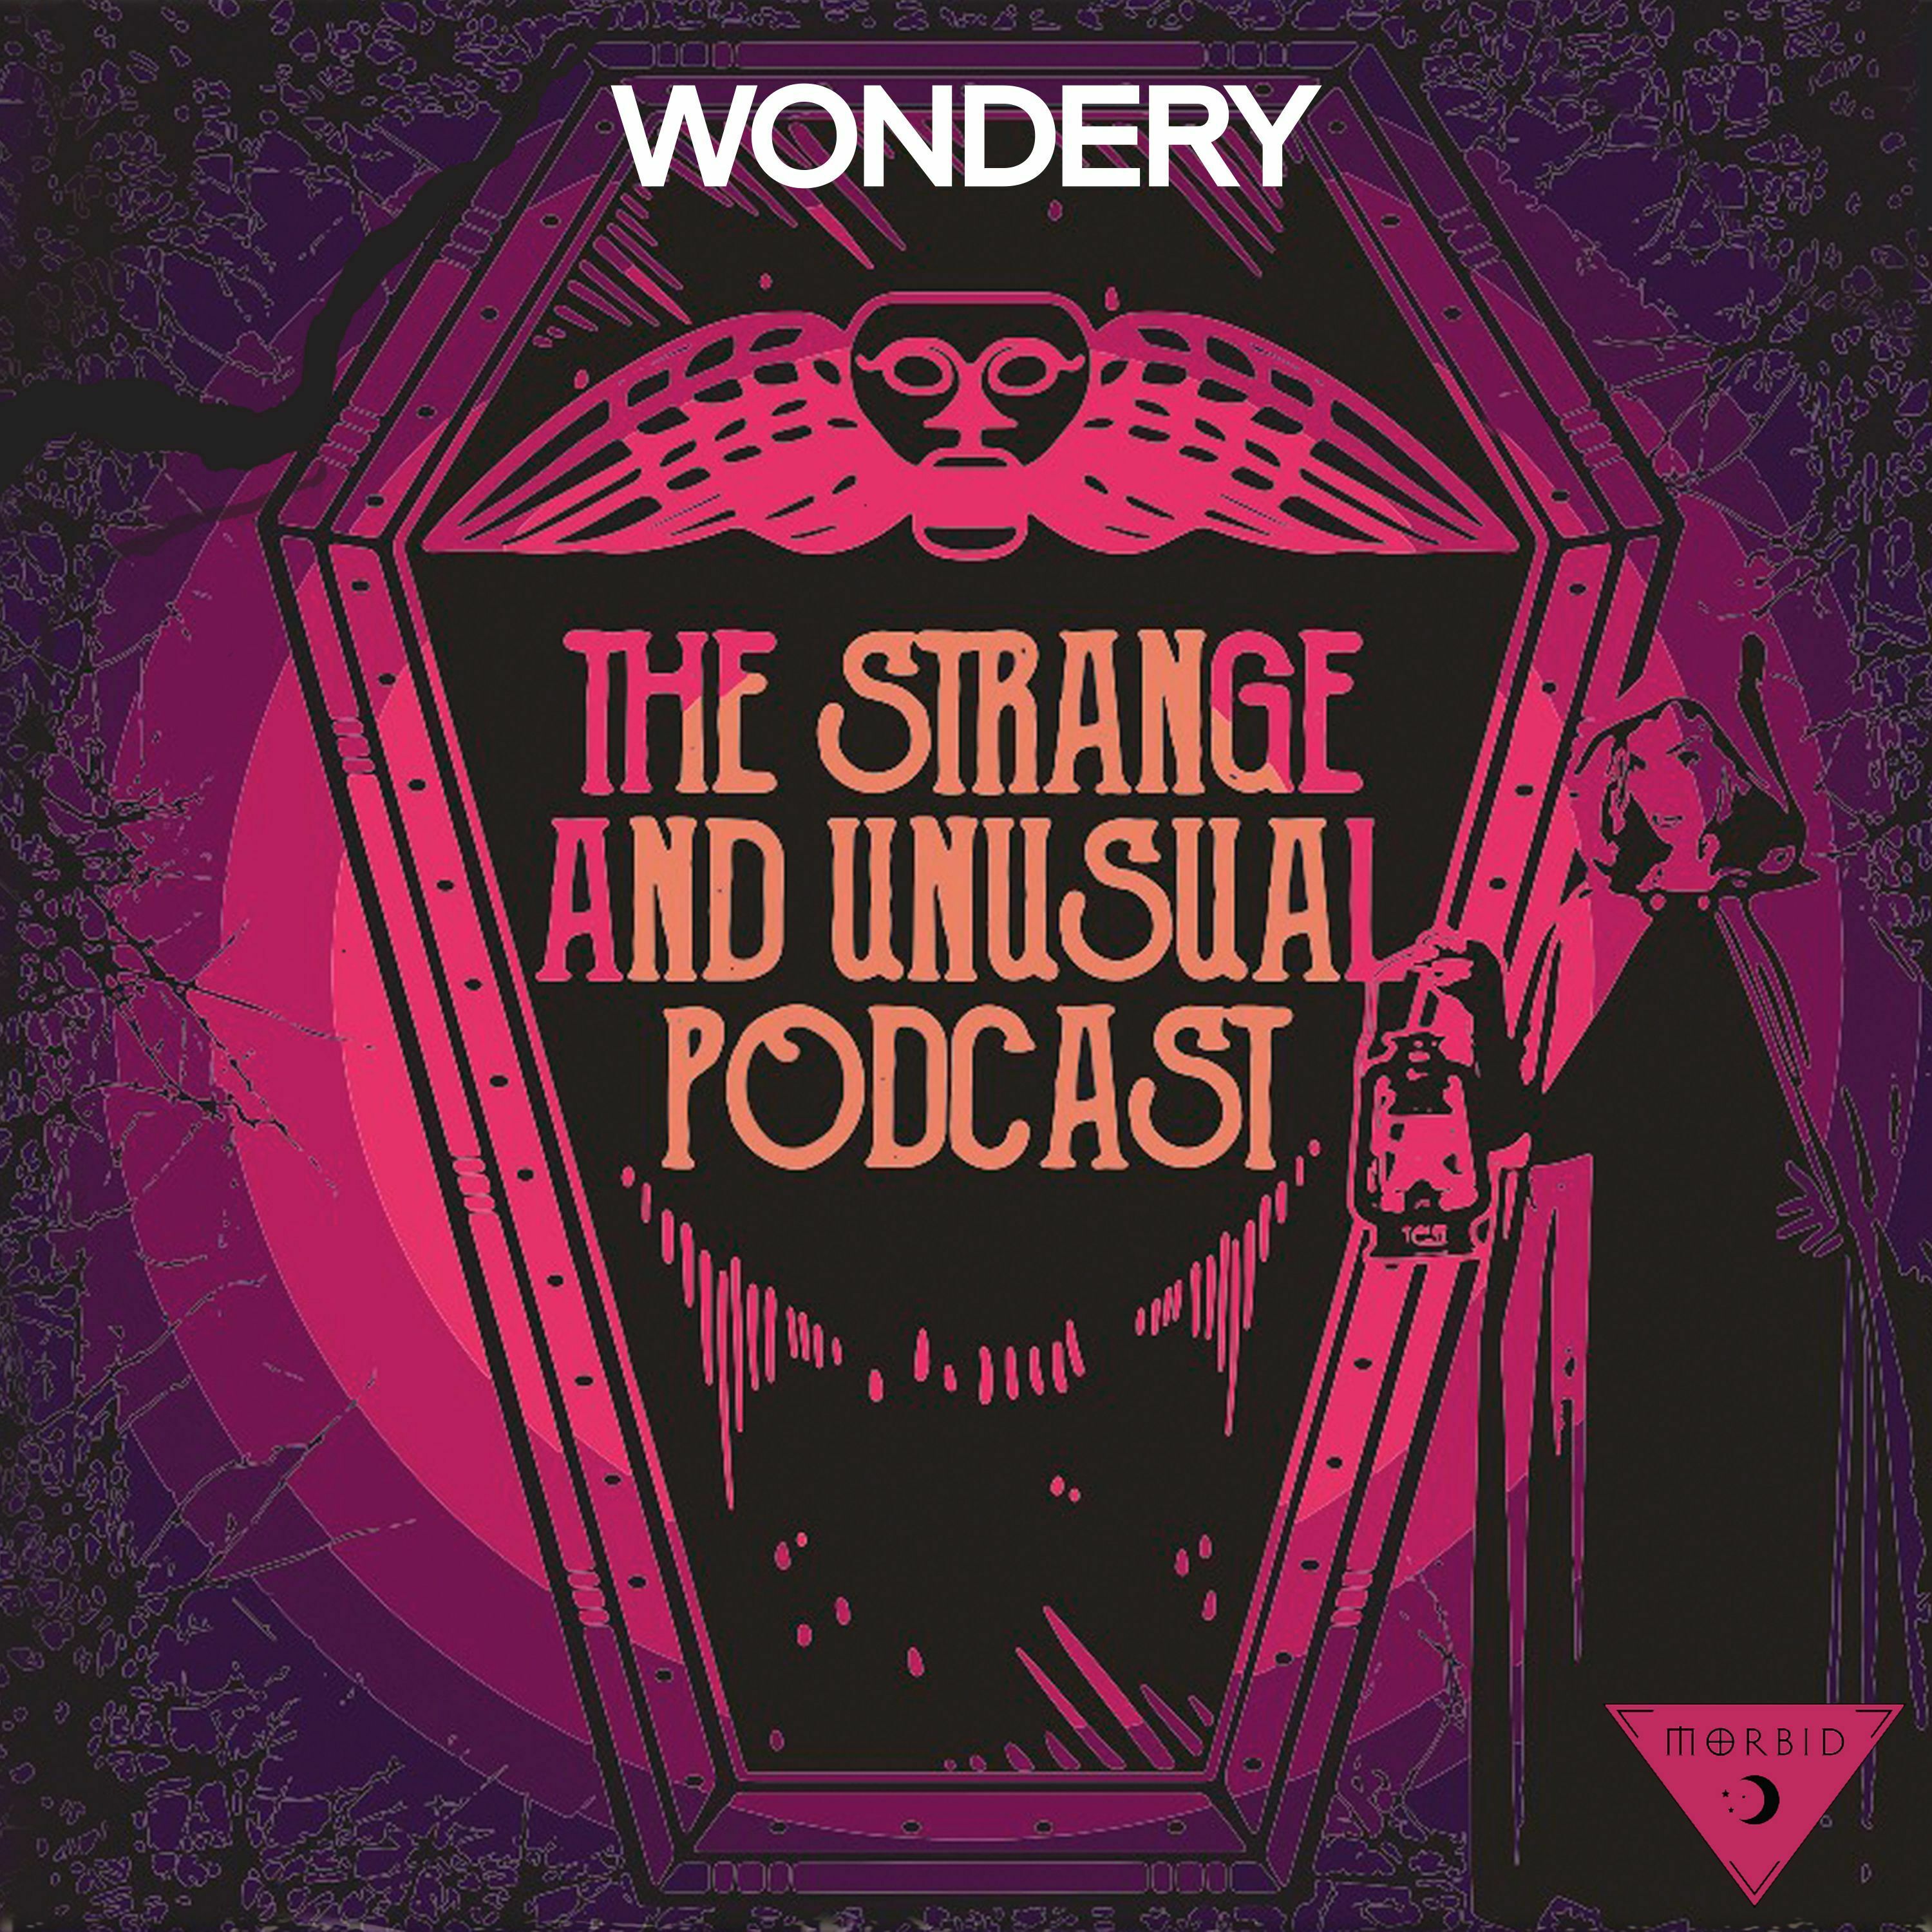 The Strange and Unusual Podcast podcast